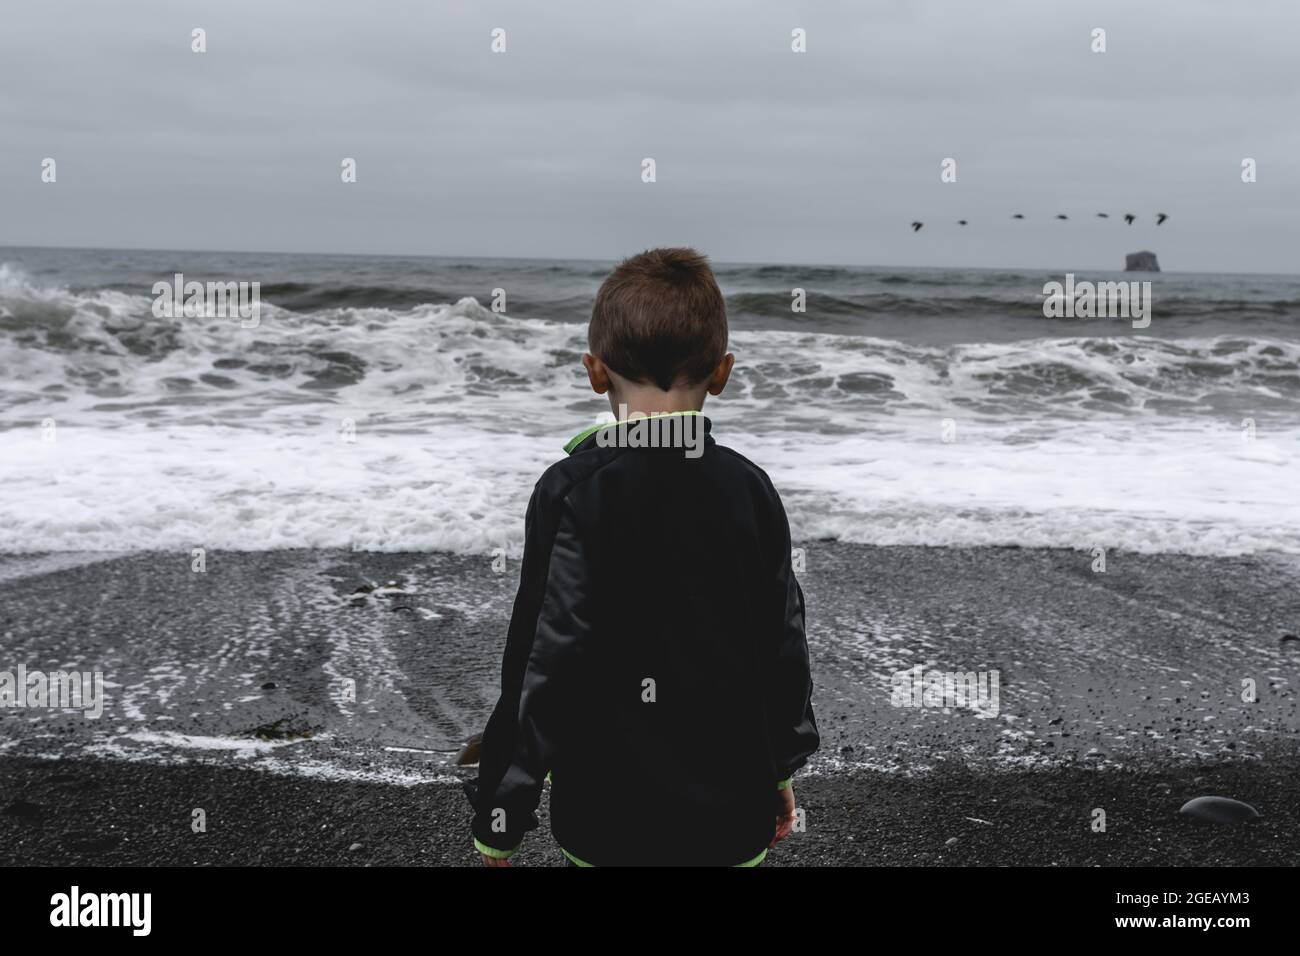 Young boy looking out at the waves on Rialto Beach in Olympic National Park, pelicans flying in the background. Stock Photo